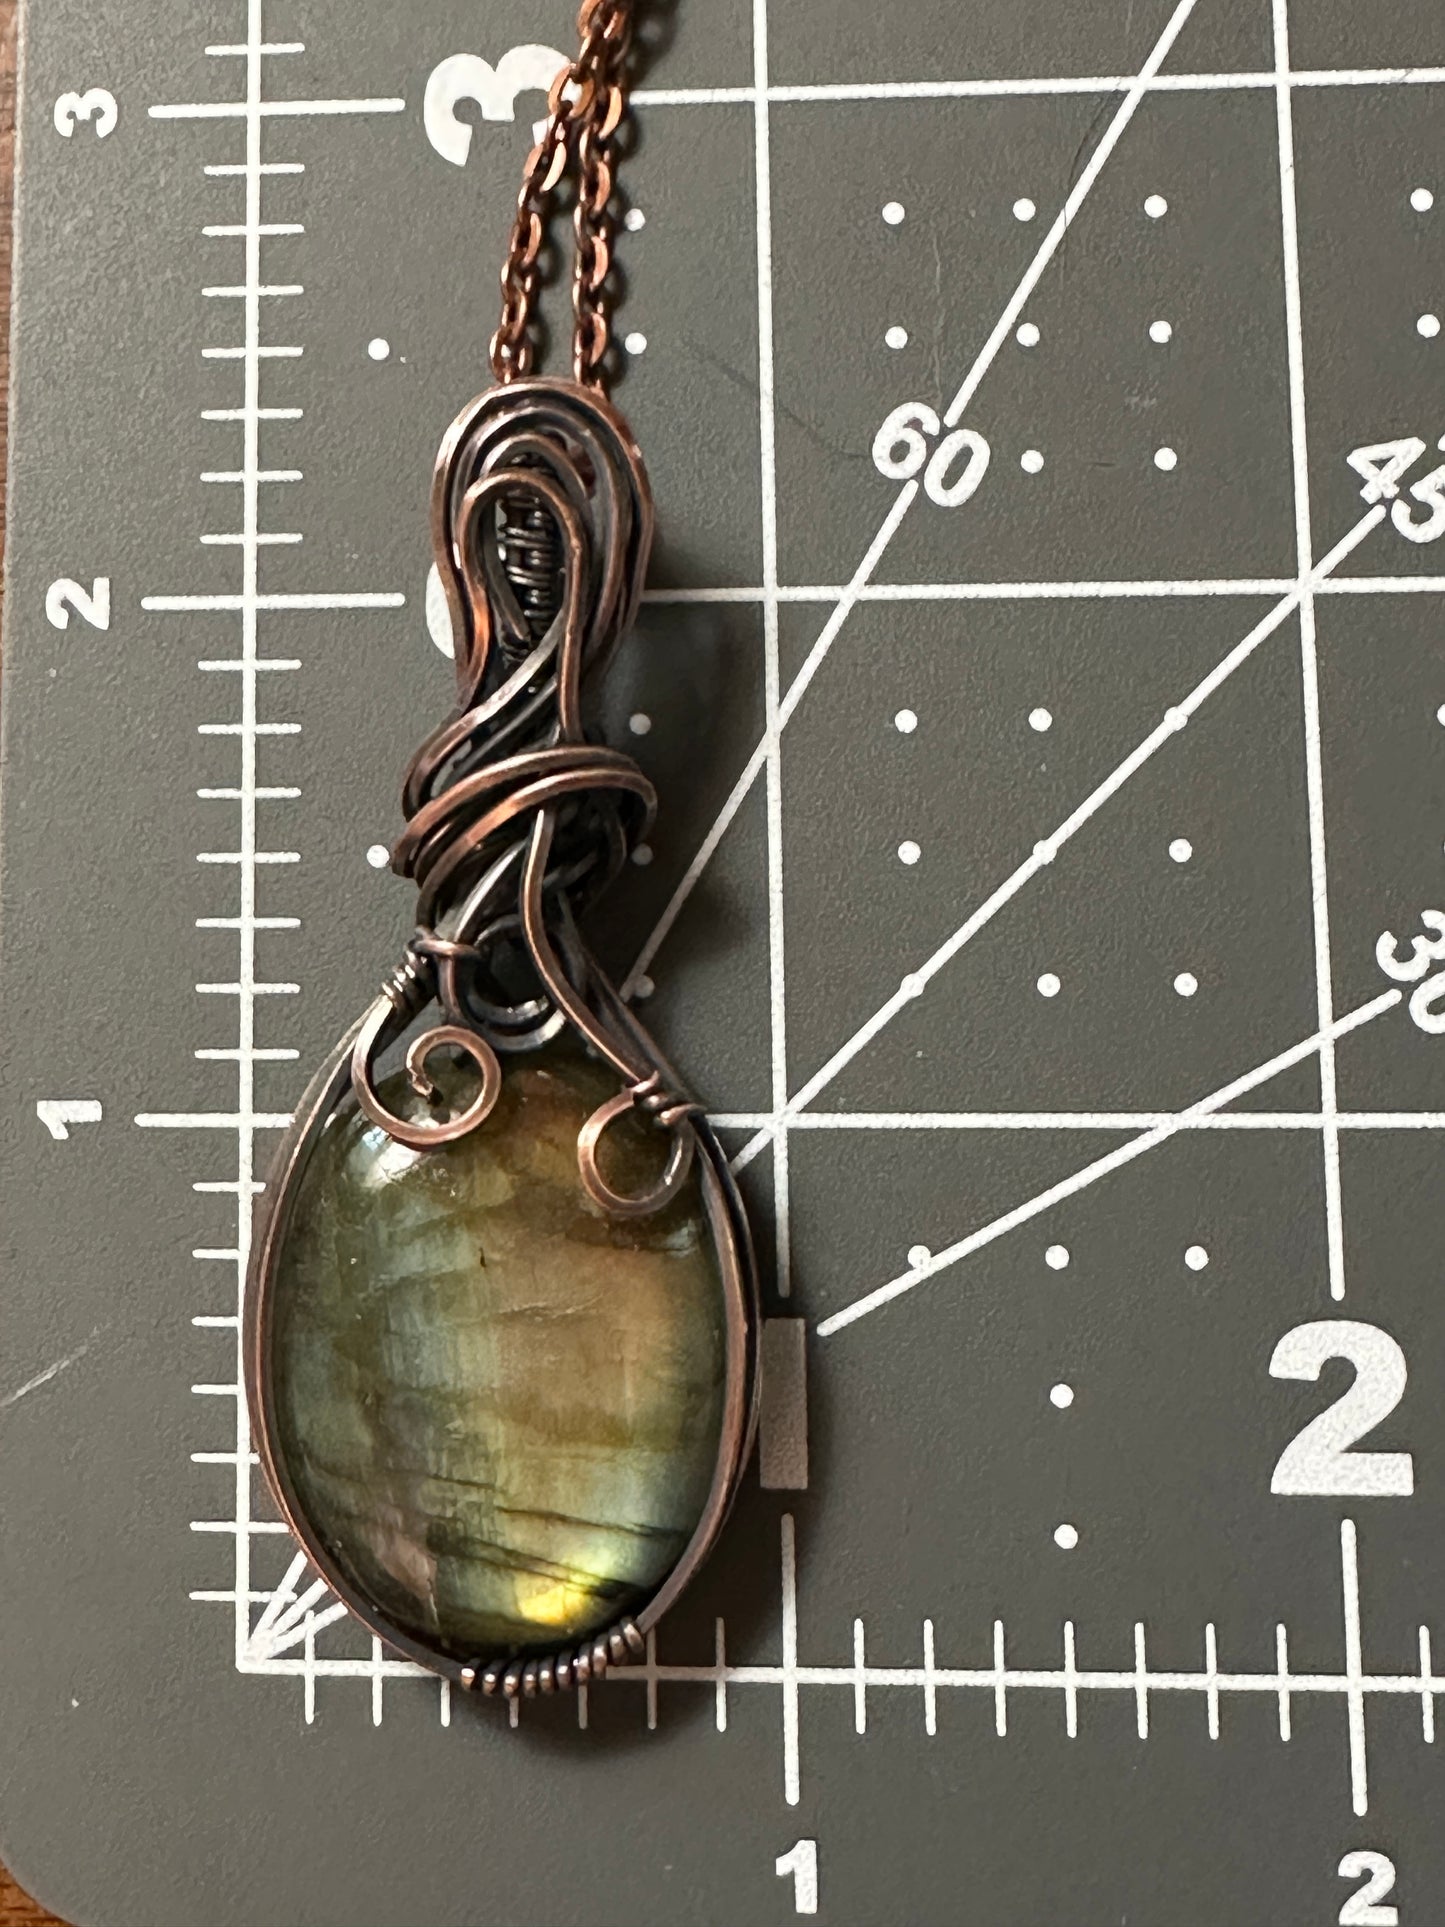 Oval Labradorite Pendant | Wire Wrapped Necklace